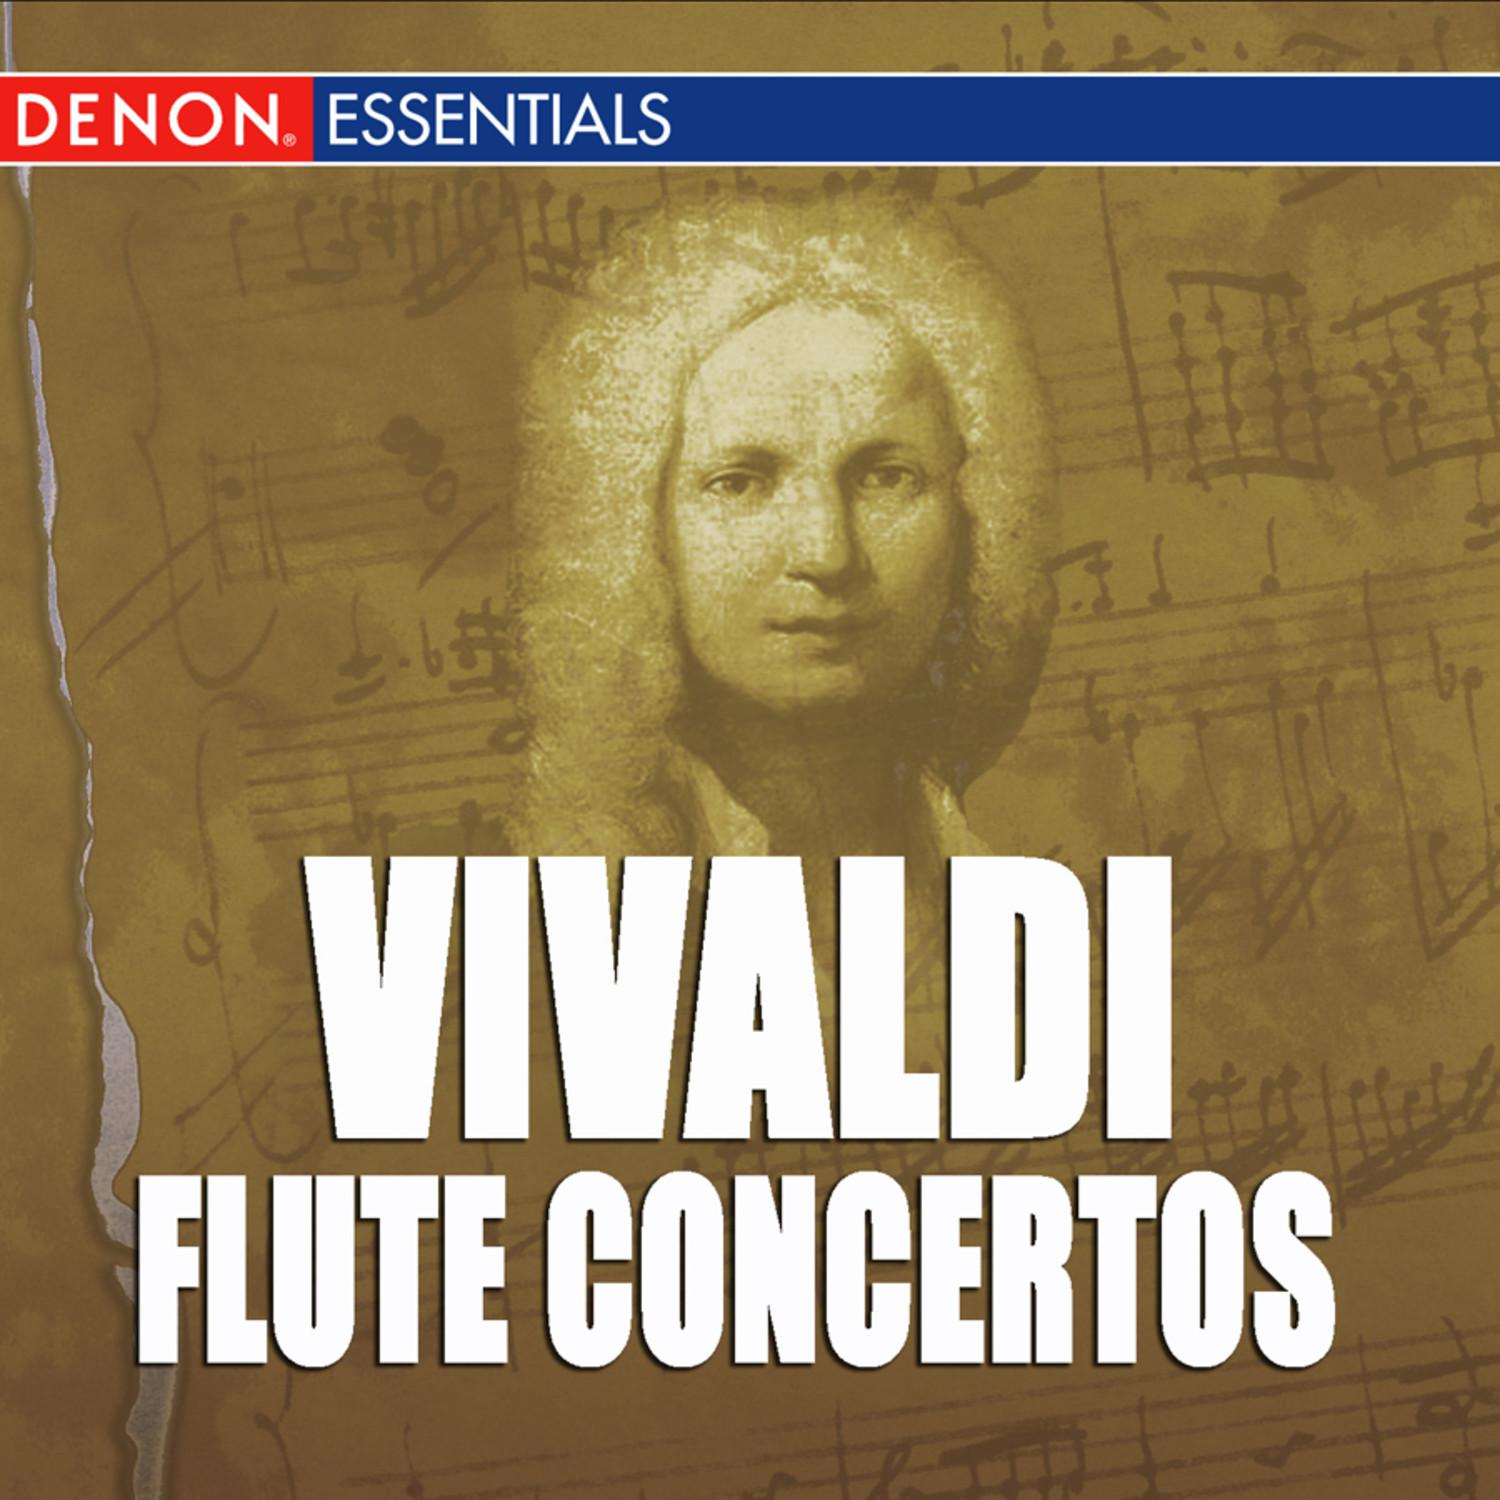 Concerto for Flute, Strings and B.c. No. 2 in C Major, RV 533: II. Largo